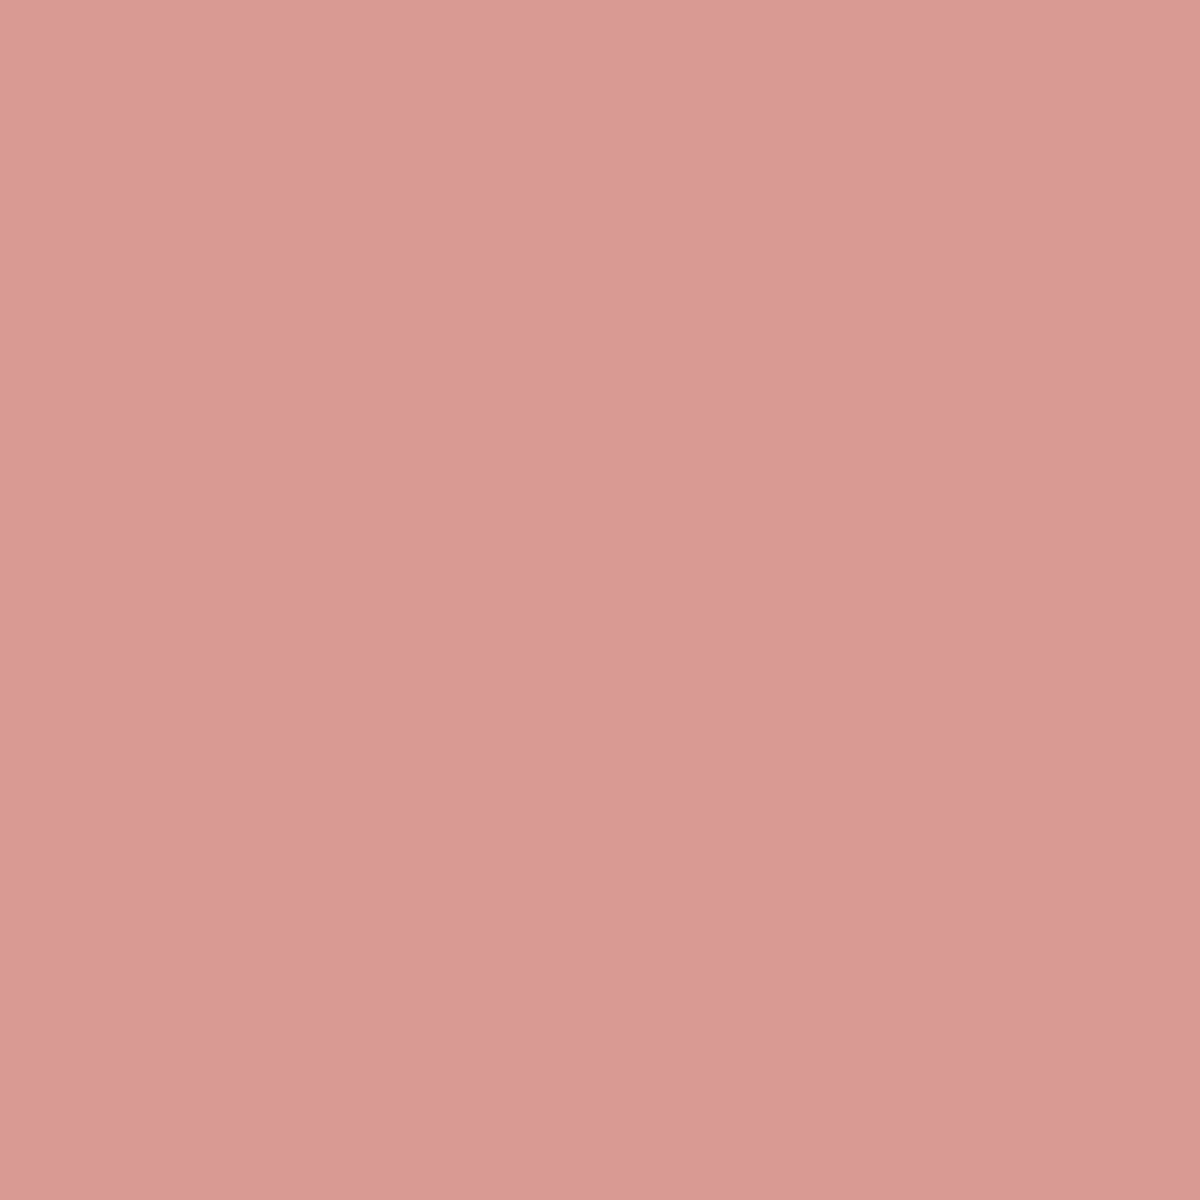 Swatch of Serene, a warm pink coral